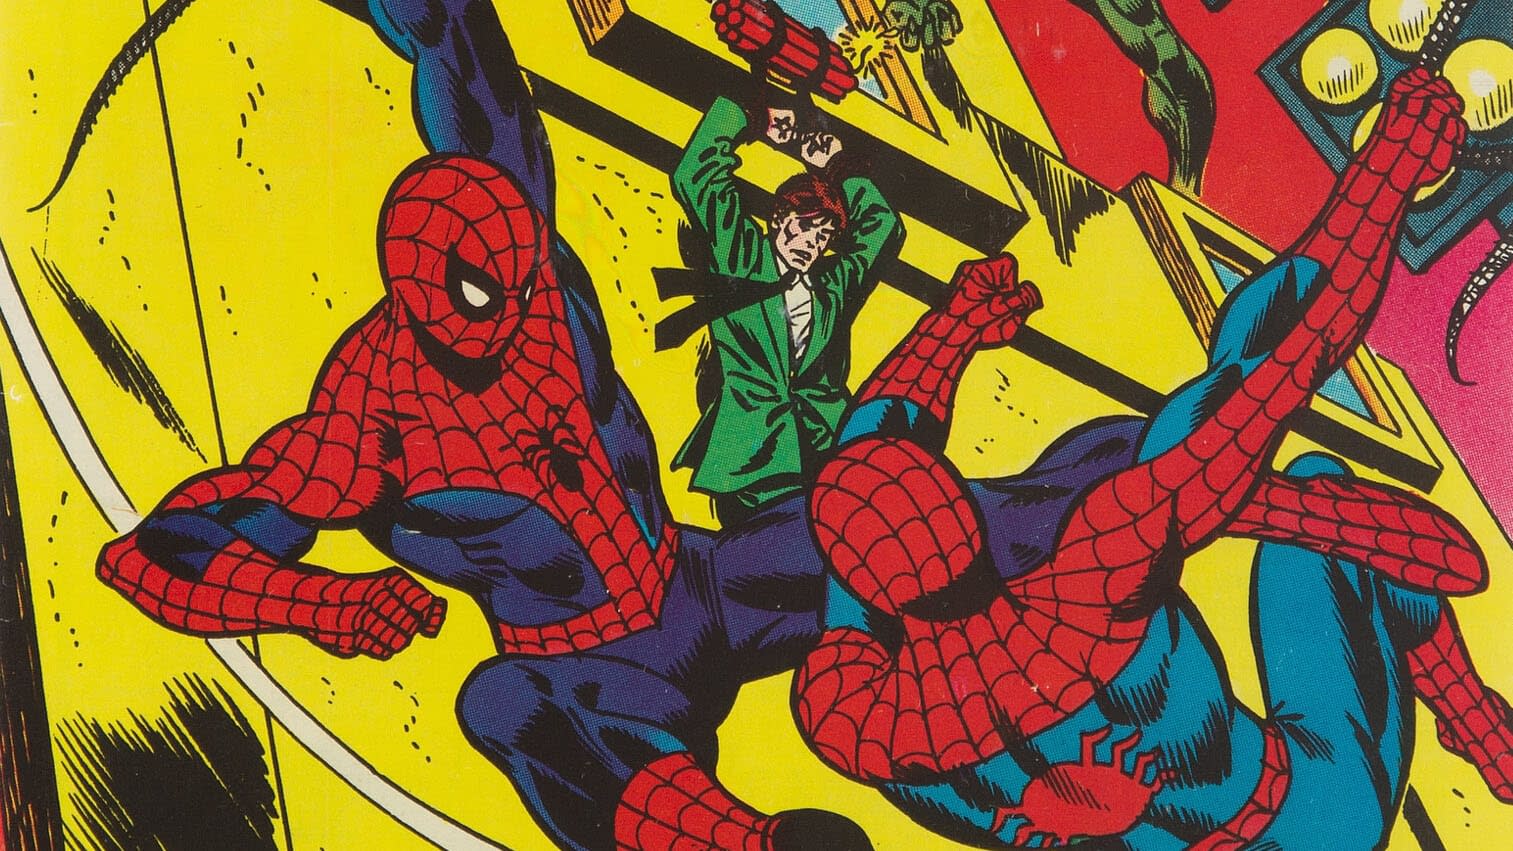 The Spider-Man Saga that Spun Out of Stan Lee's Vacation, at Auction